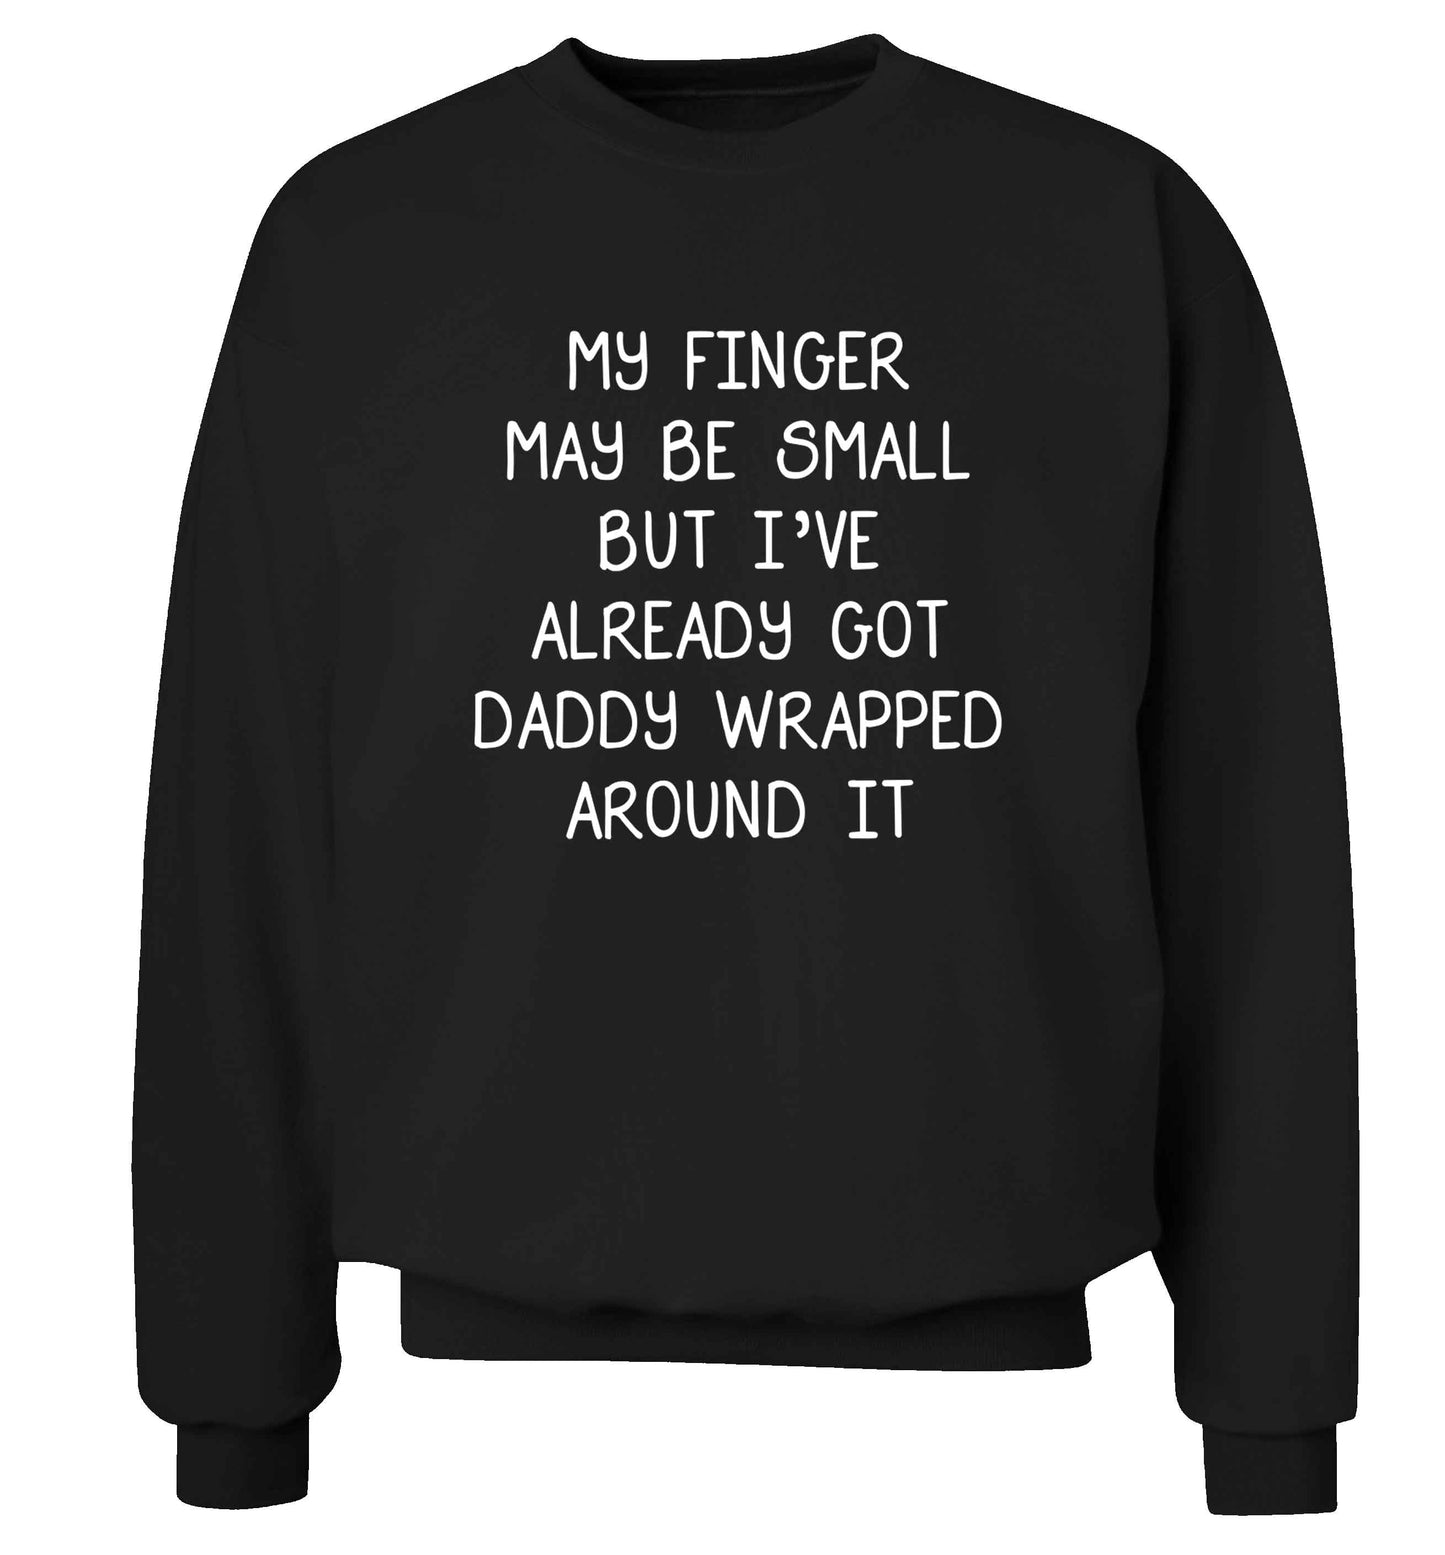 My finger may be small but I've already got daddy wrapped around it adult's unisex black sweater 2XL